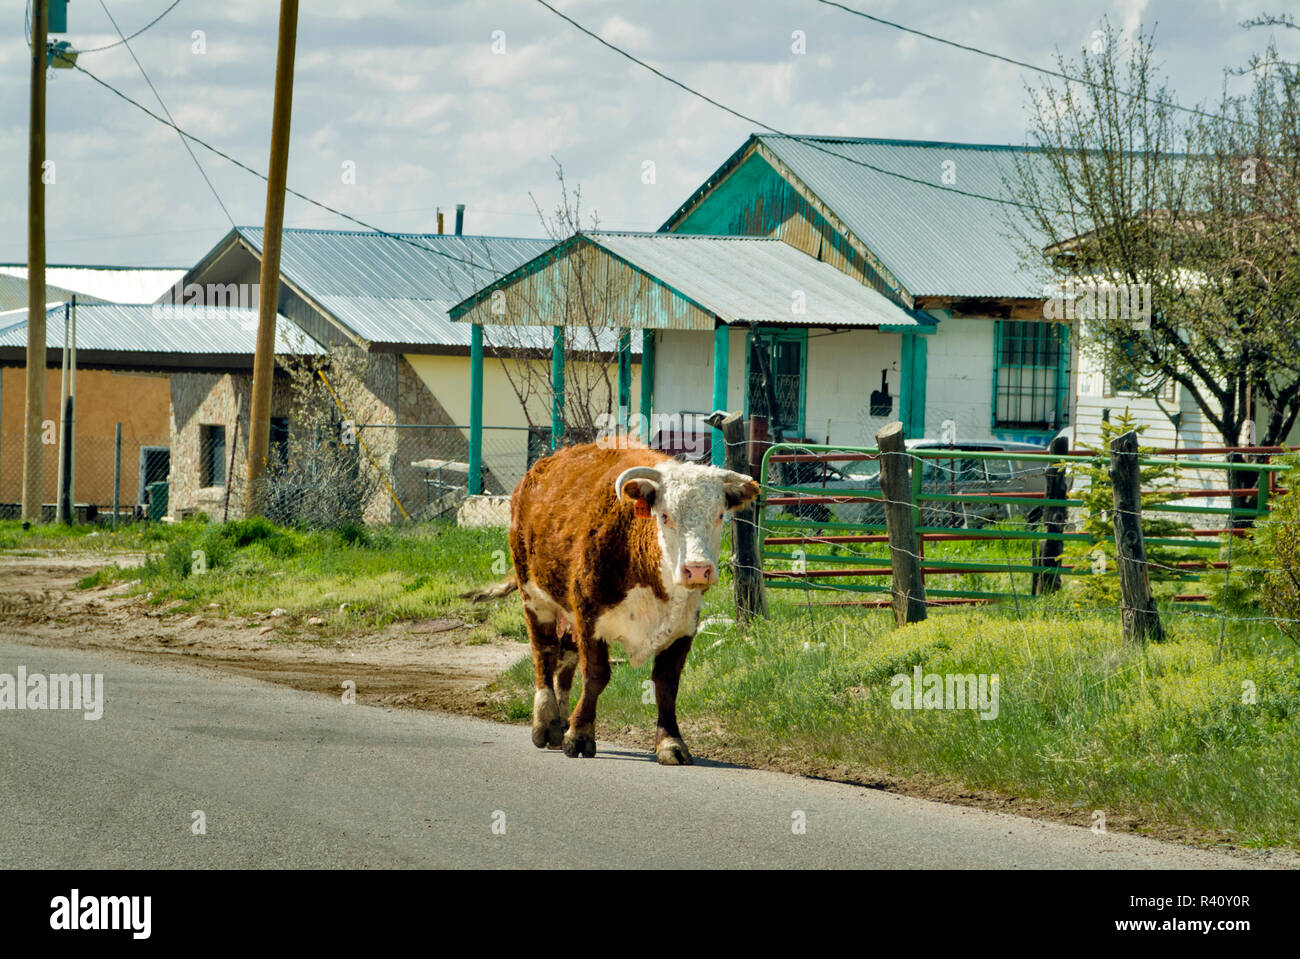 USA, New Mexico, Las Trampas. A cow with one broken horn saunters down the main street through Las Trampas village. Stock Photo